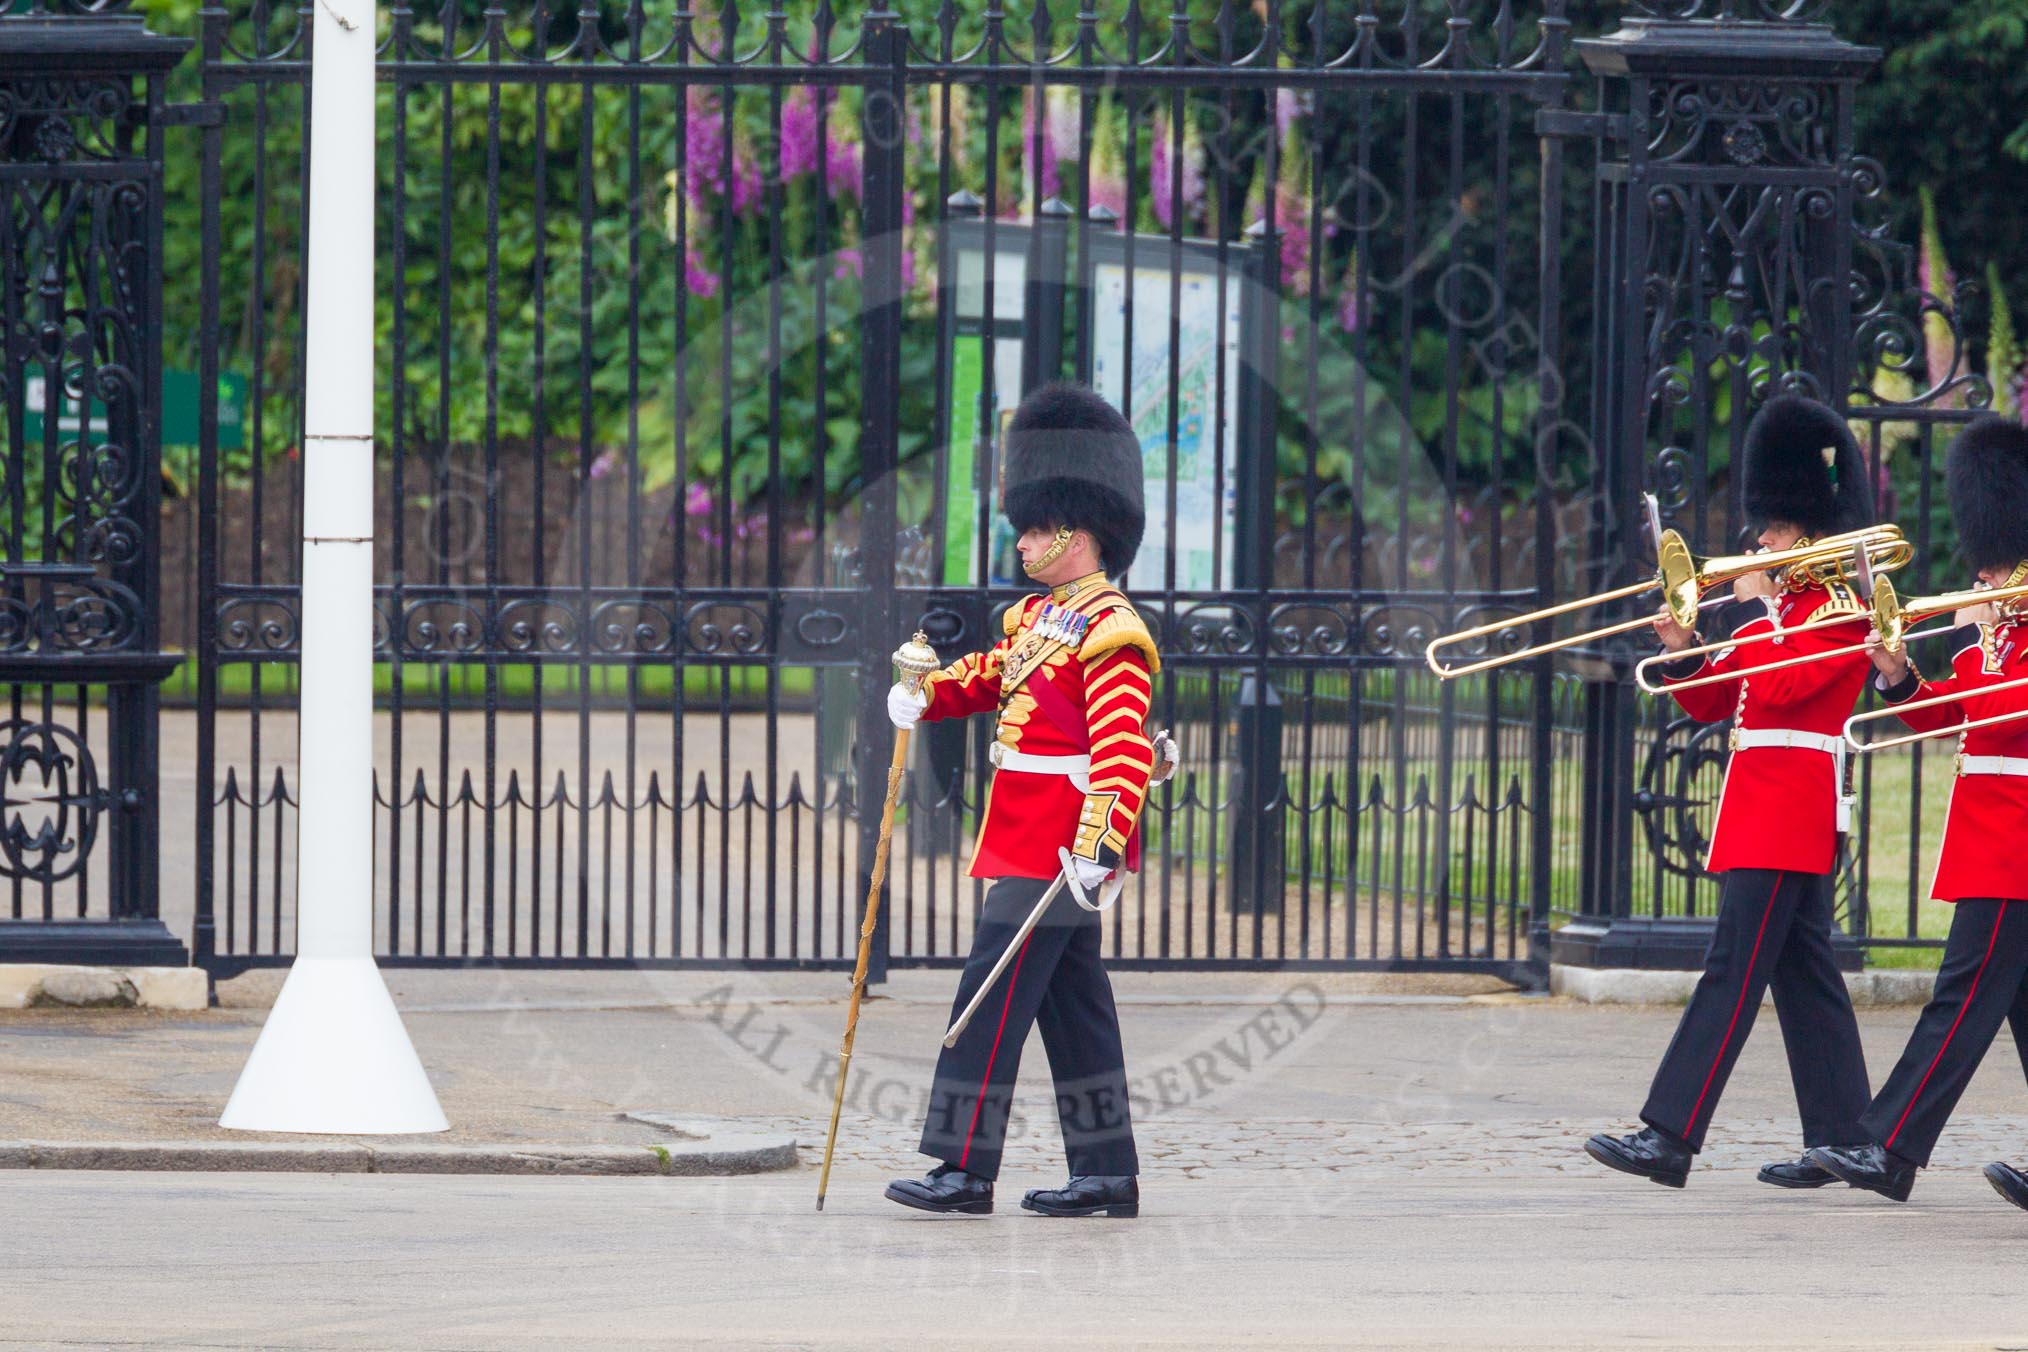 The Colonel's Review 2016.
Horse Guards Parade, Westminster,
London,

United Kingdom,
on 04 June 2016 at 10:13, image #34